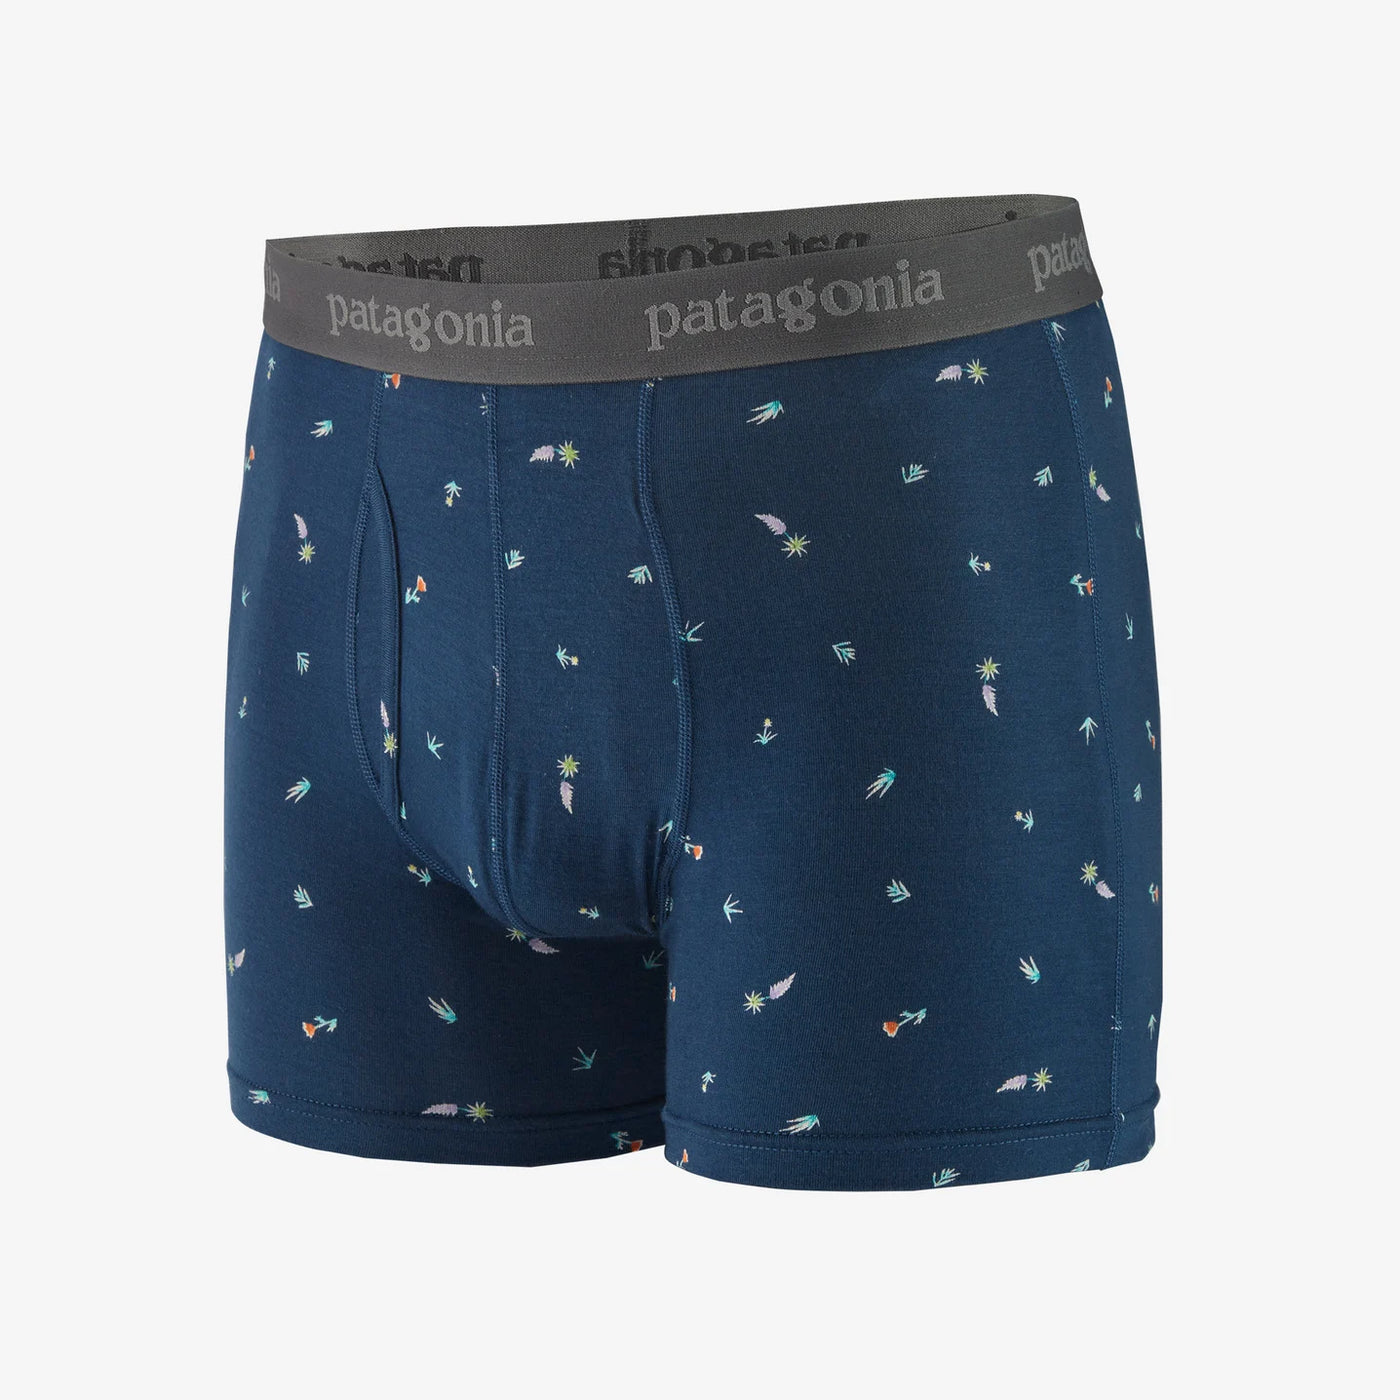 Patagonia Men's Essential Boxer Briefs - 3"-MENS CLOTHING-River Walk Tidepool Blue-S-Kevin's Fine Outdoor Gear & Apparel